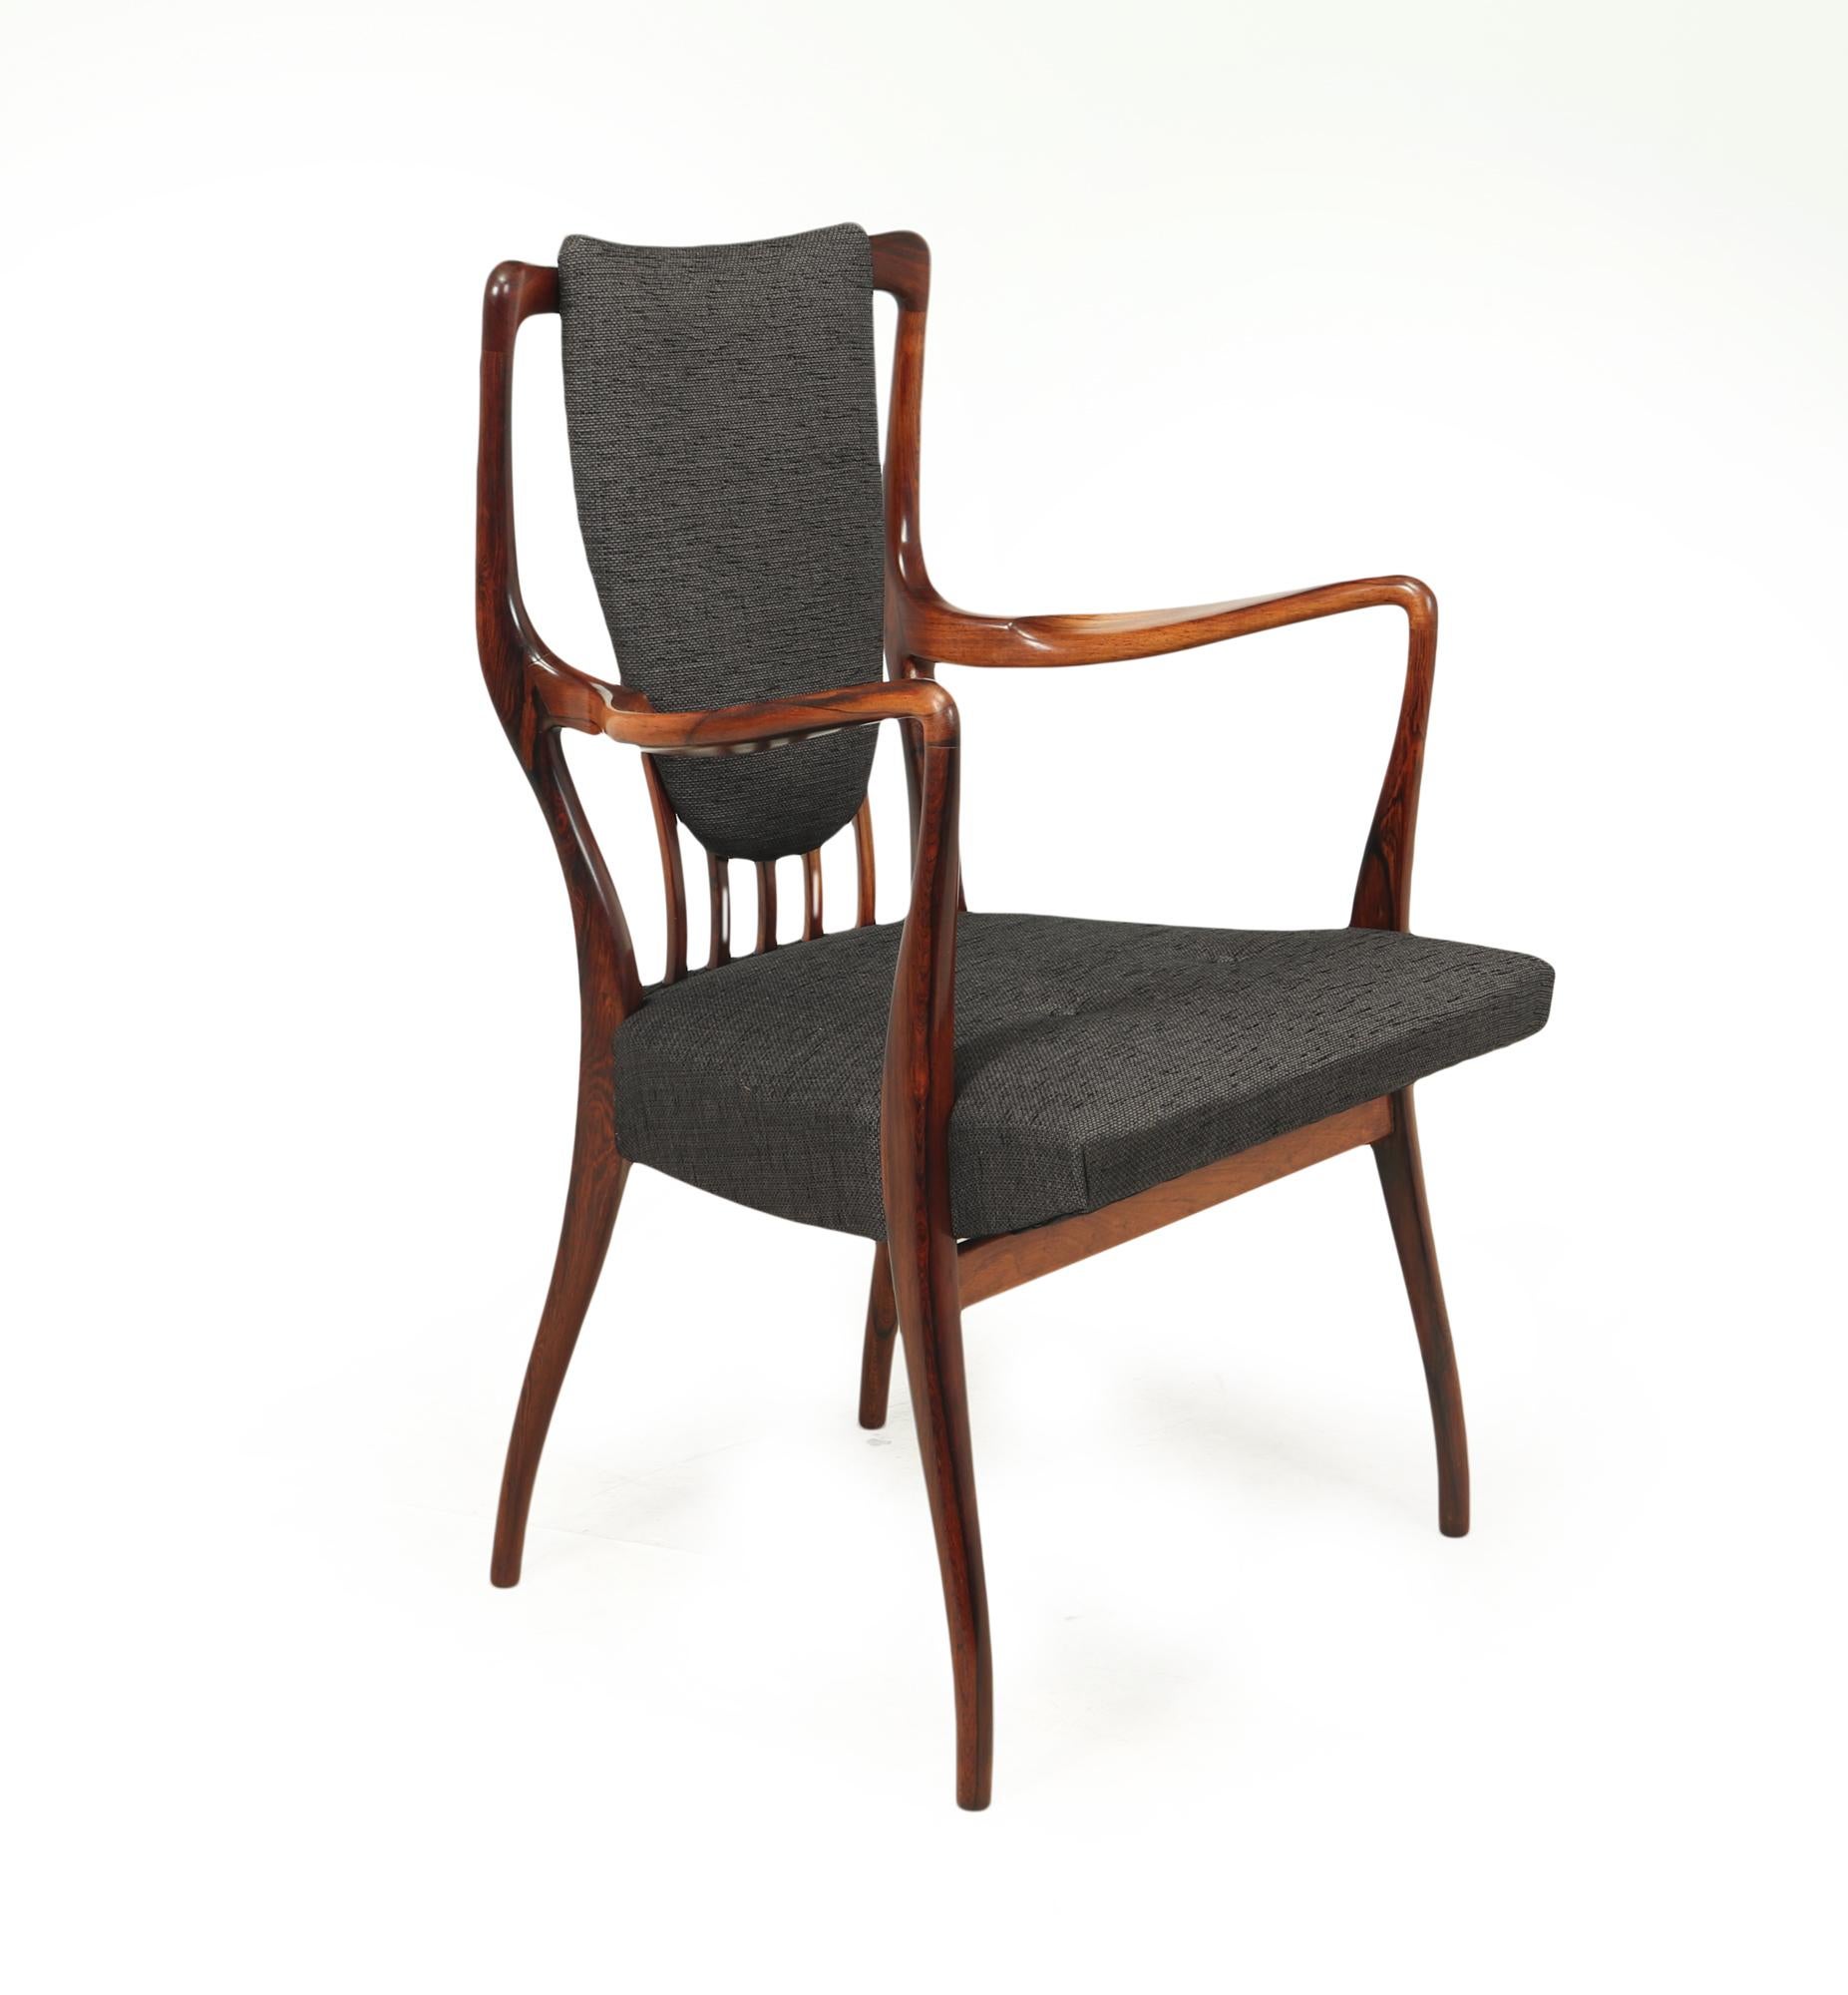 A set of six carver arm chairs designed in 1947 by Andrew J Milne and retailed by Heals through the middle of the 20th century, the chairs are solid rosewood sculpturally carved and shaped to make this super stylish and comfortable design, as you